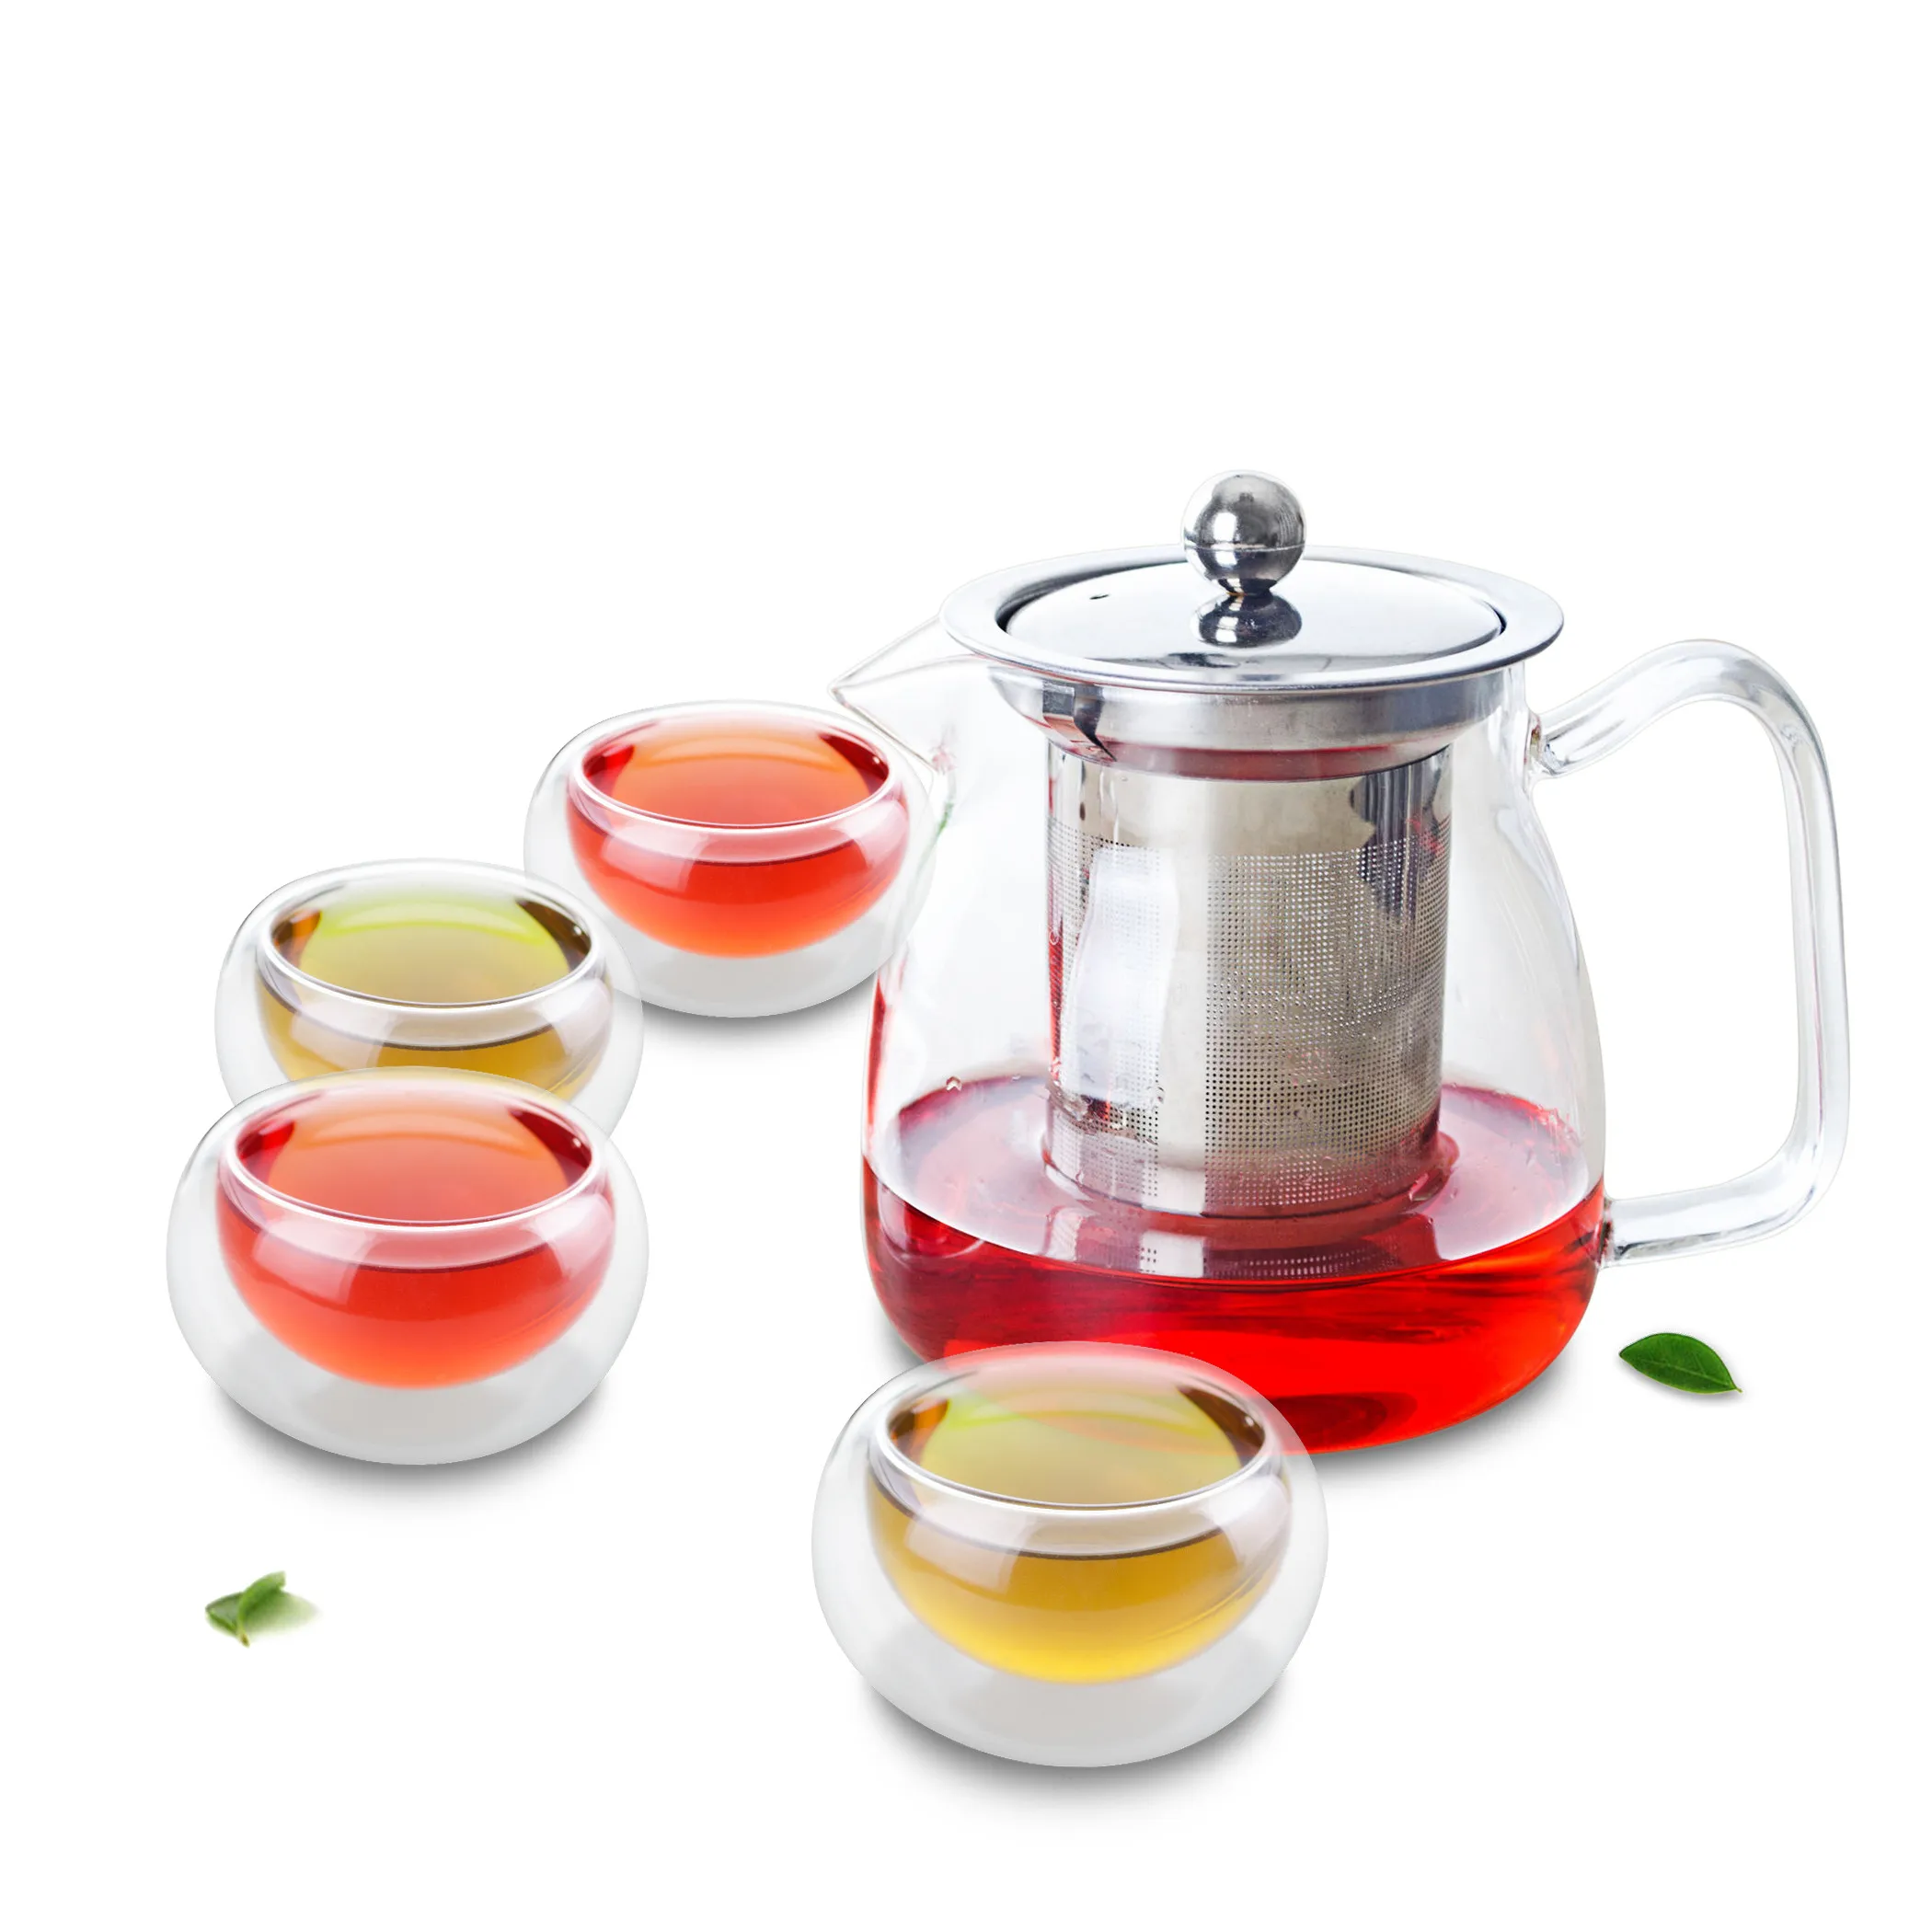 

1x 5in1 Kung fu Coffee Tea Set-575ml Glass Flower Teapot w/ Stainless Steel Infuser Filter + 4x Double Wall layer Kungfu Tea Cup